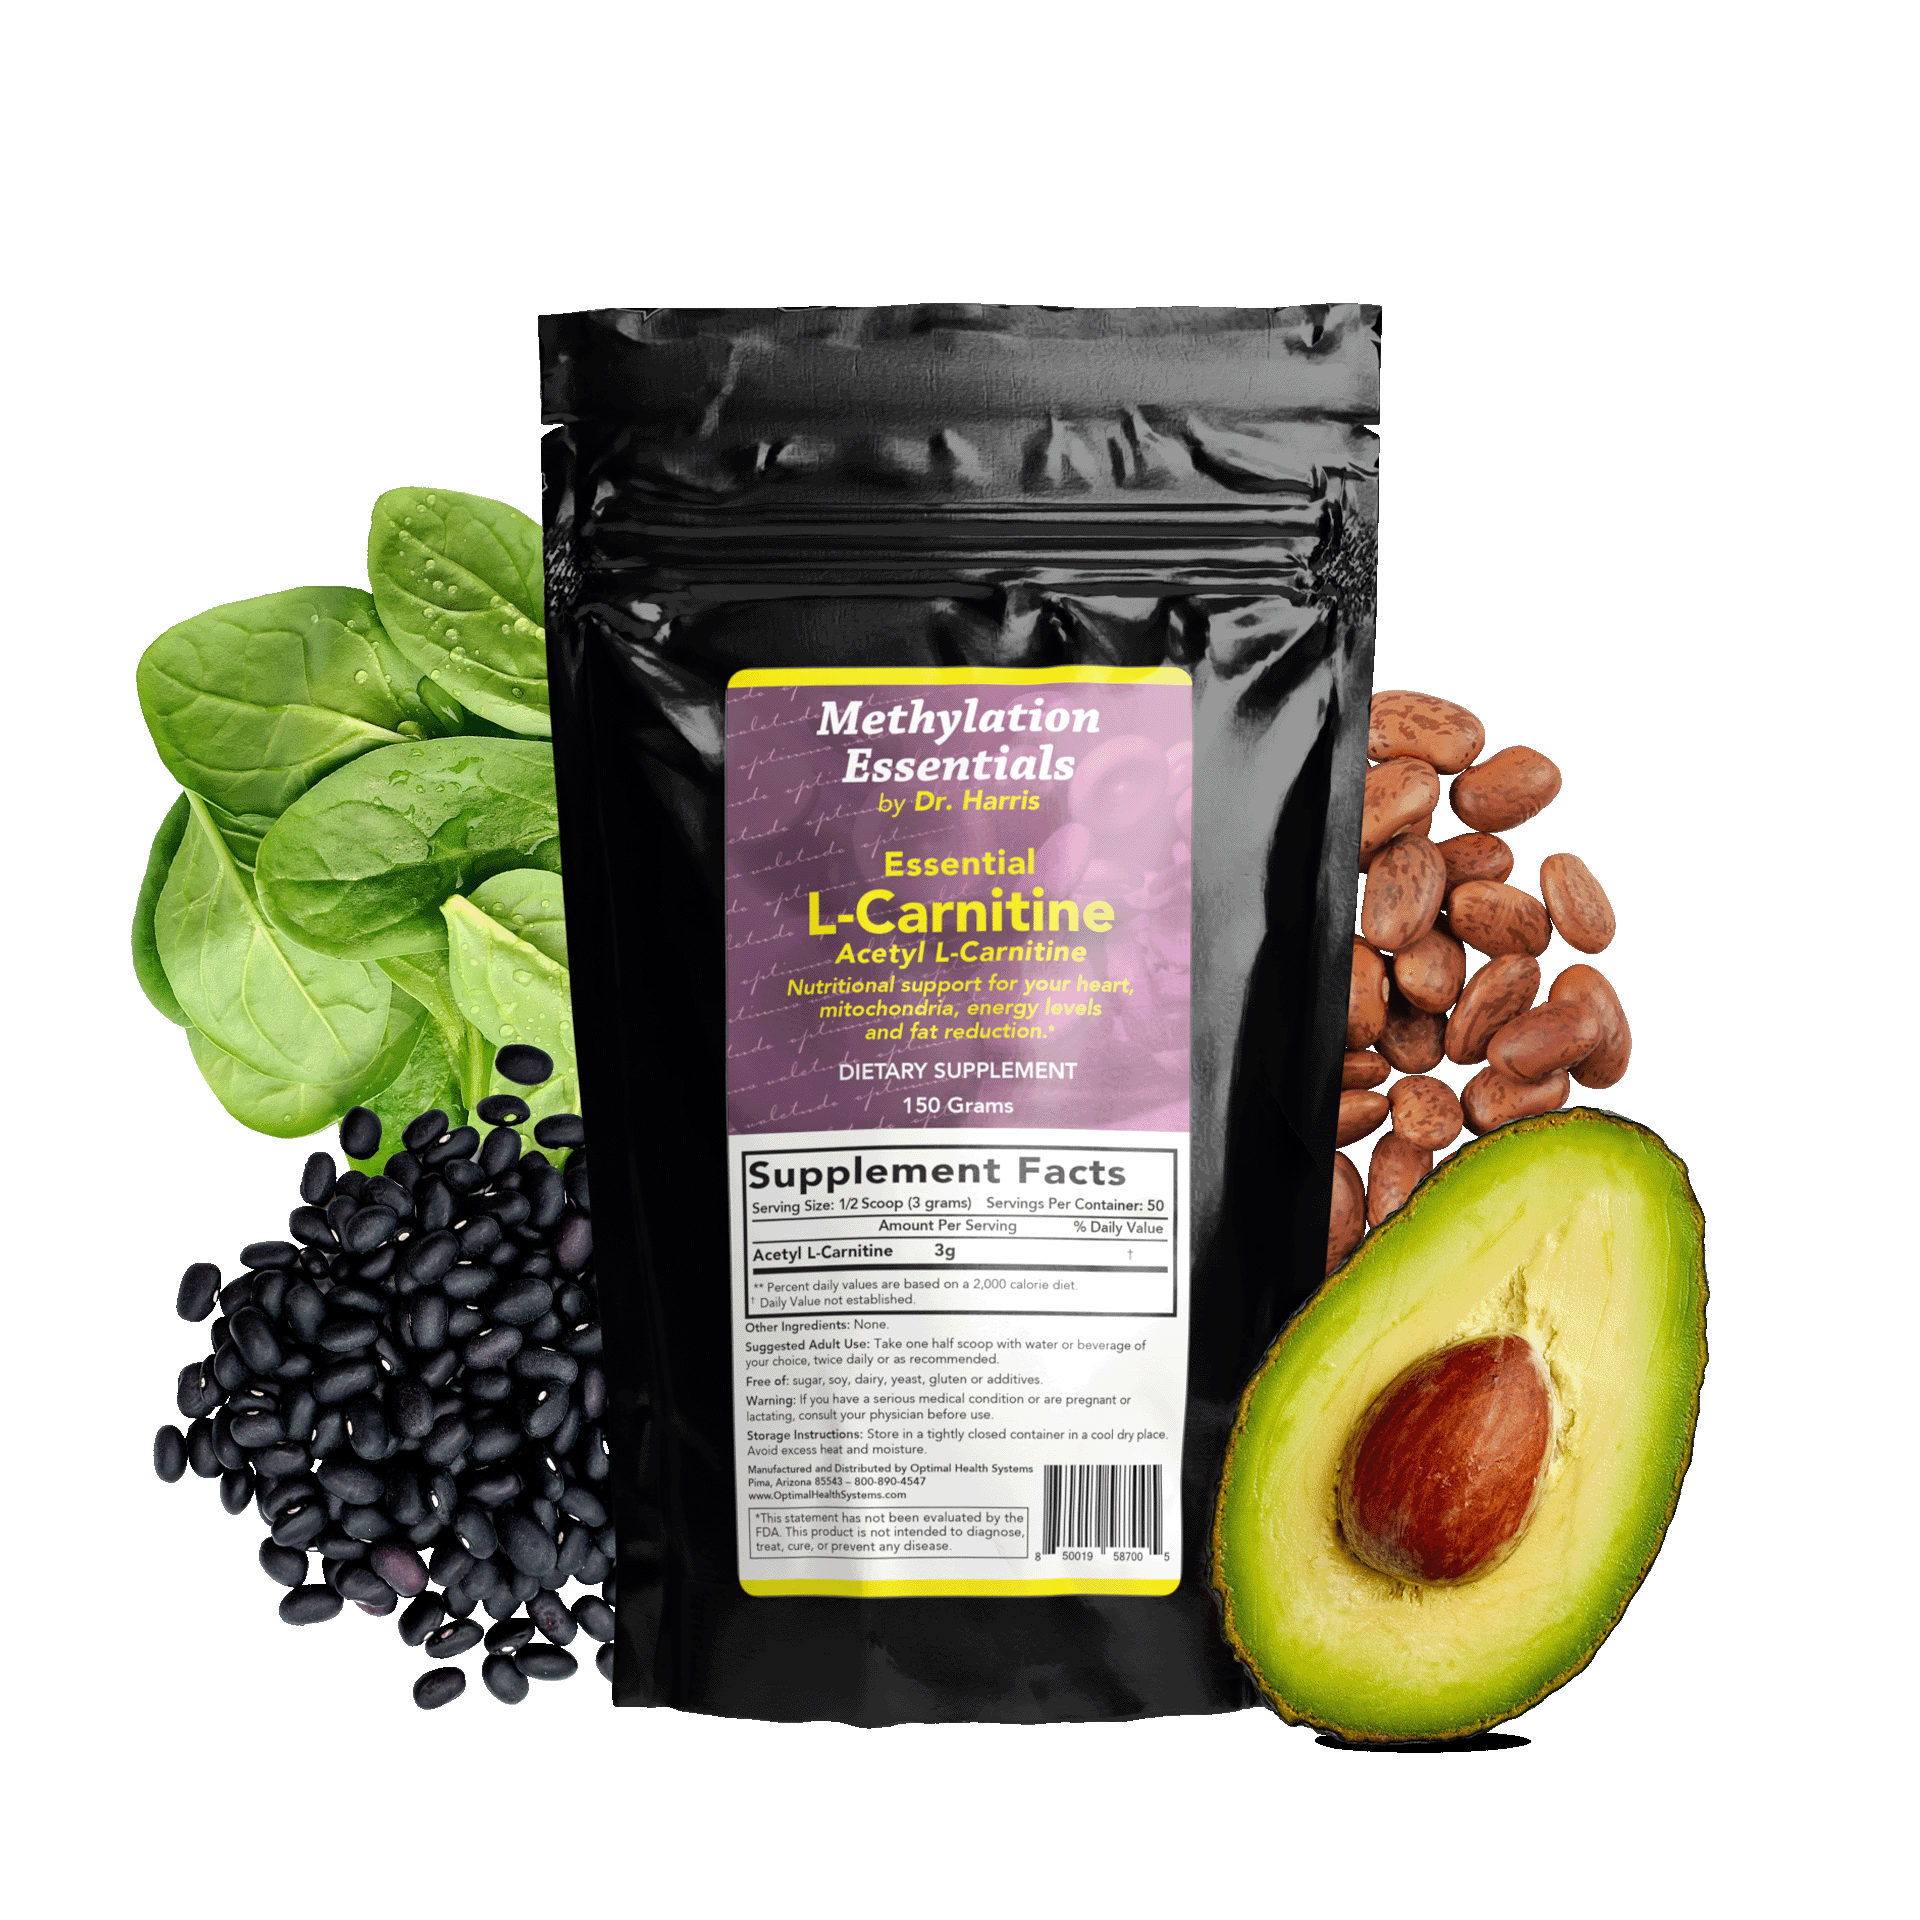 Image of a Bag of Essentials L-Carnitine Powder. Around the bag are avocados, spinach, black and brown beans.